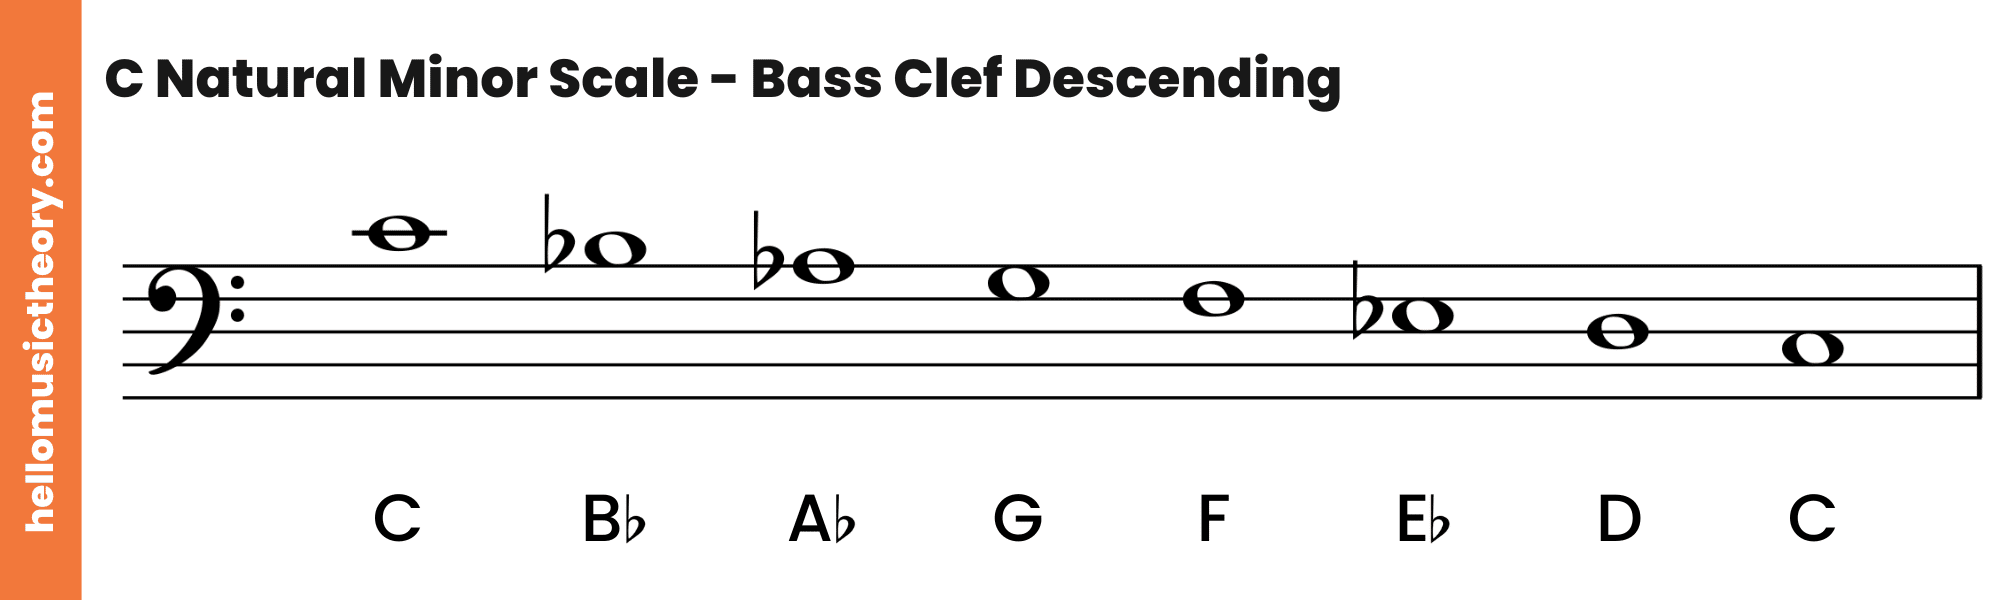 C Natural Minor Scale Bass Clef Descending